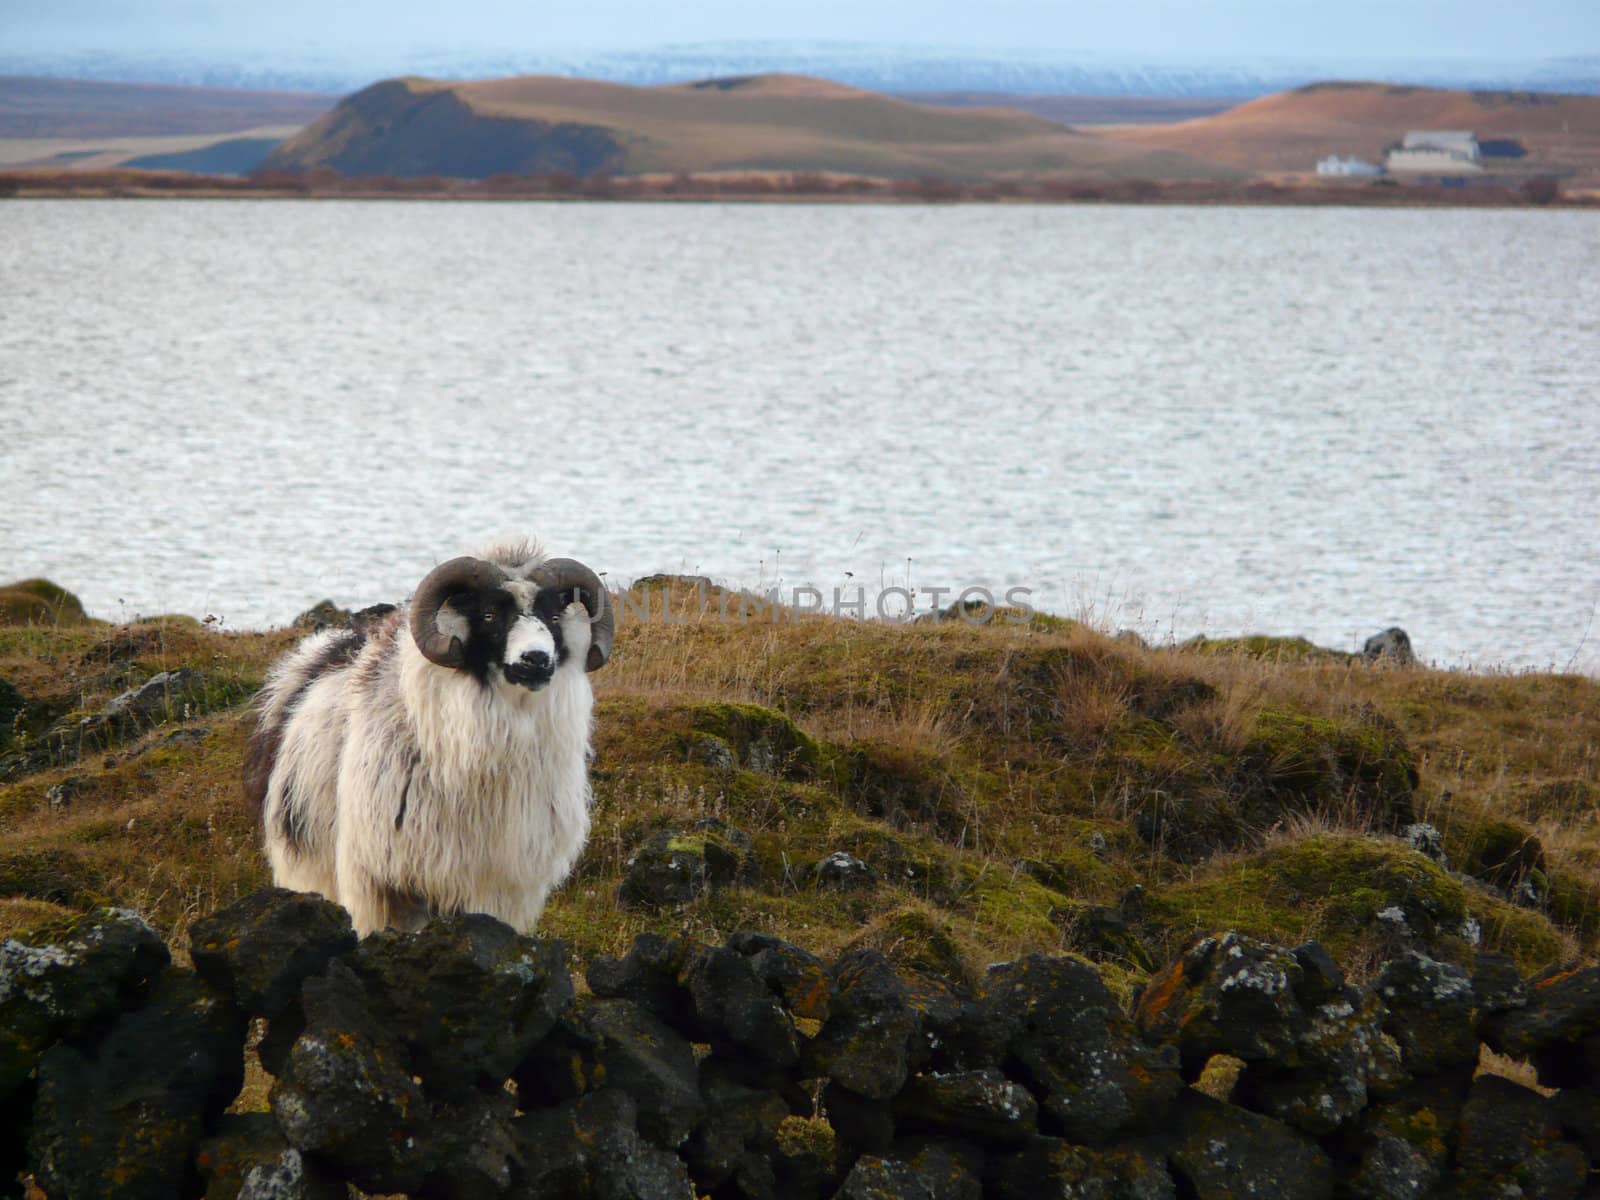 Typical Iceland sheep with horns and a thick layer of wool in front of Lake Myvatn in northern Iceland